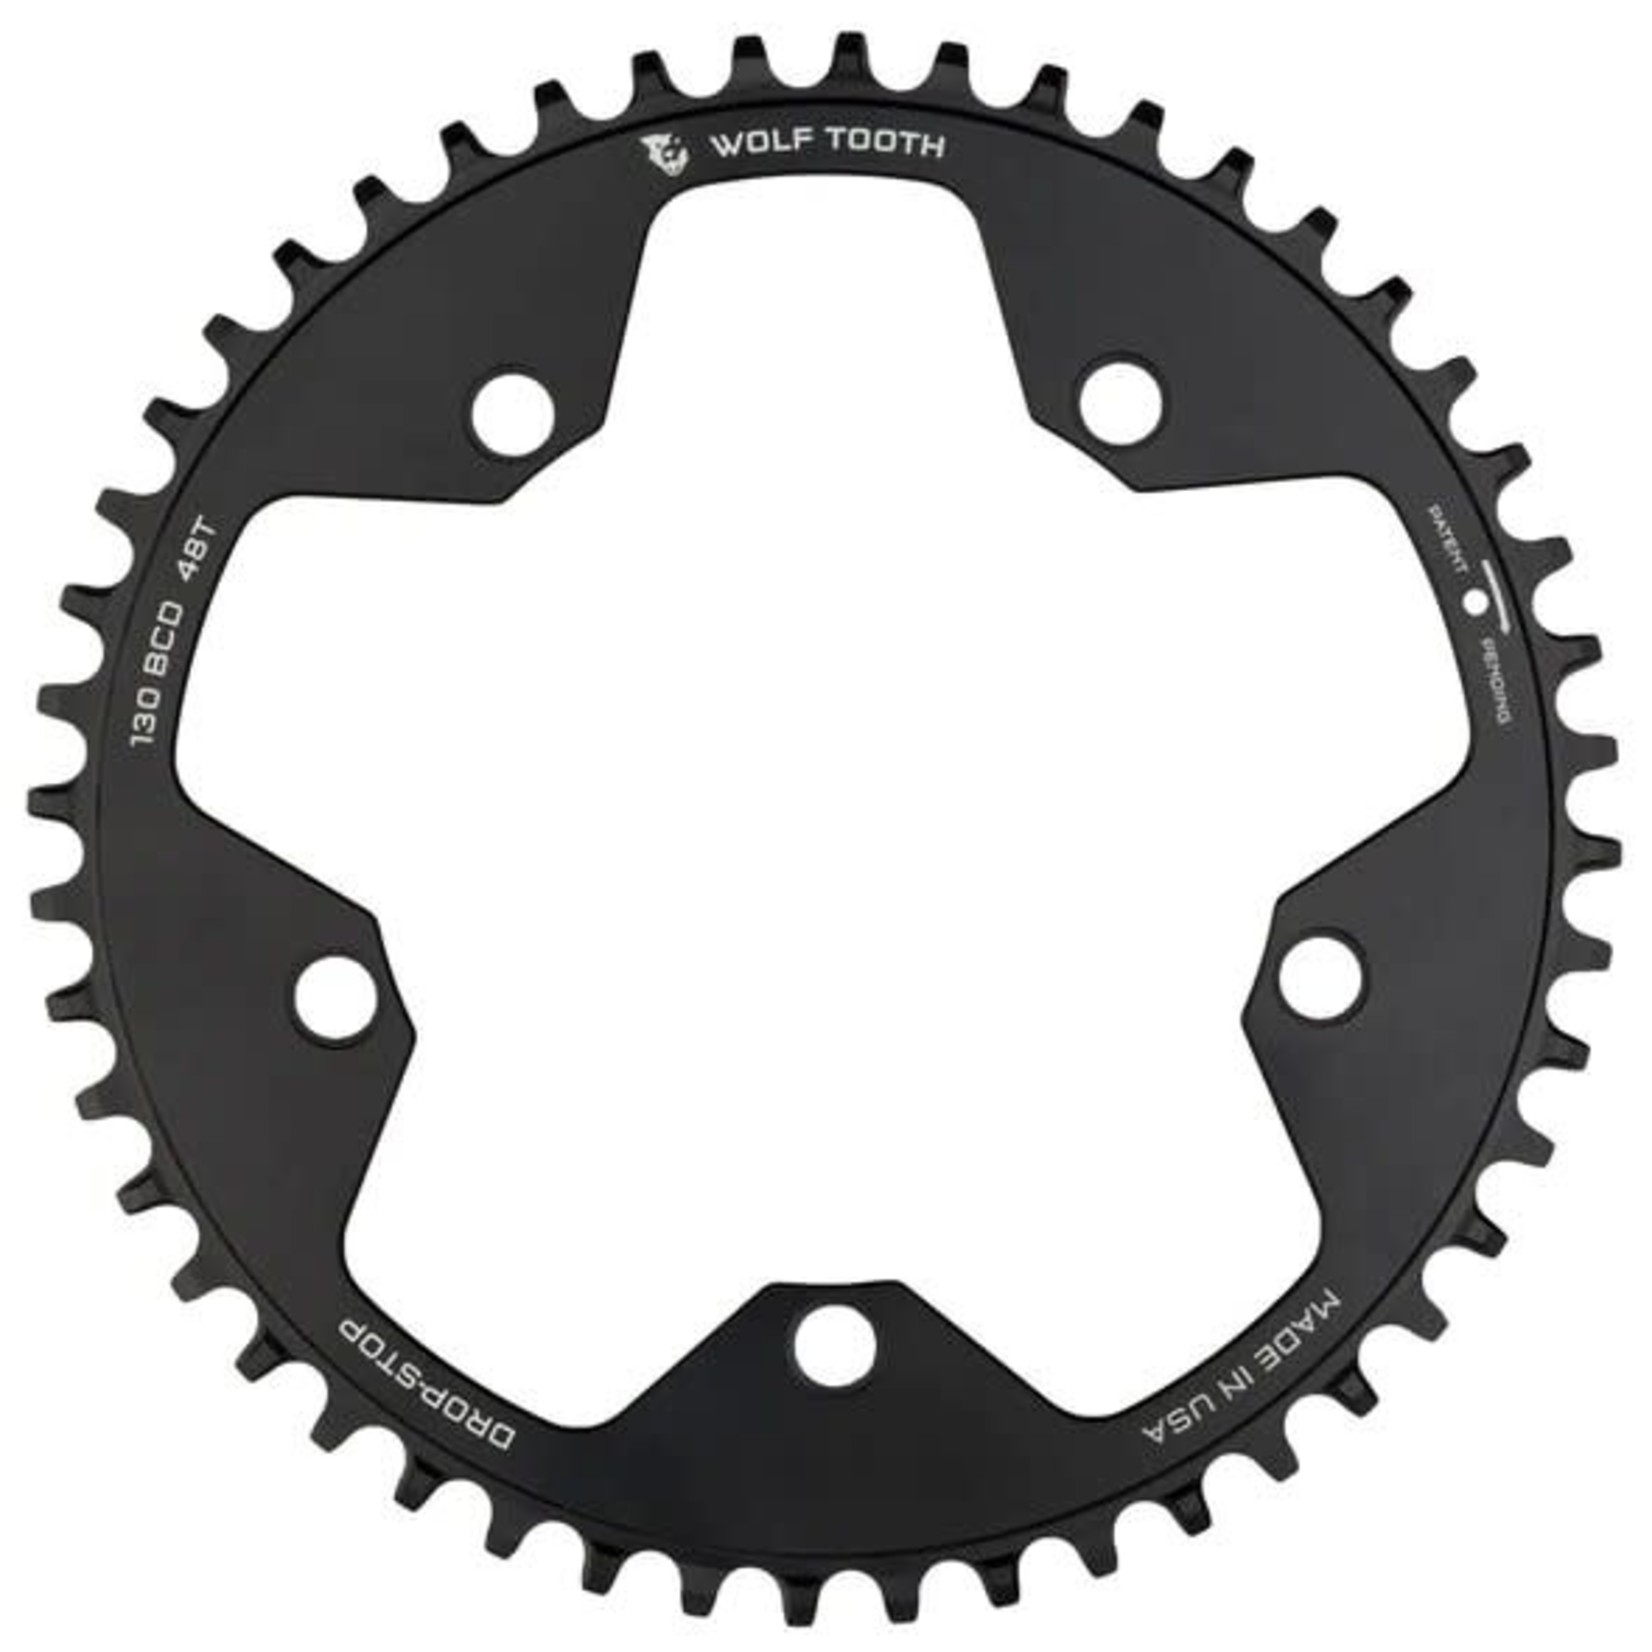 Wolf Tooth Components Wolf Tooth 130 BCD 5 Bolt Chainring 48T compatible with SRAM Flattop